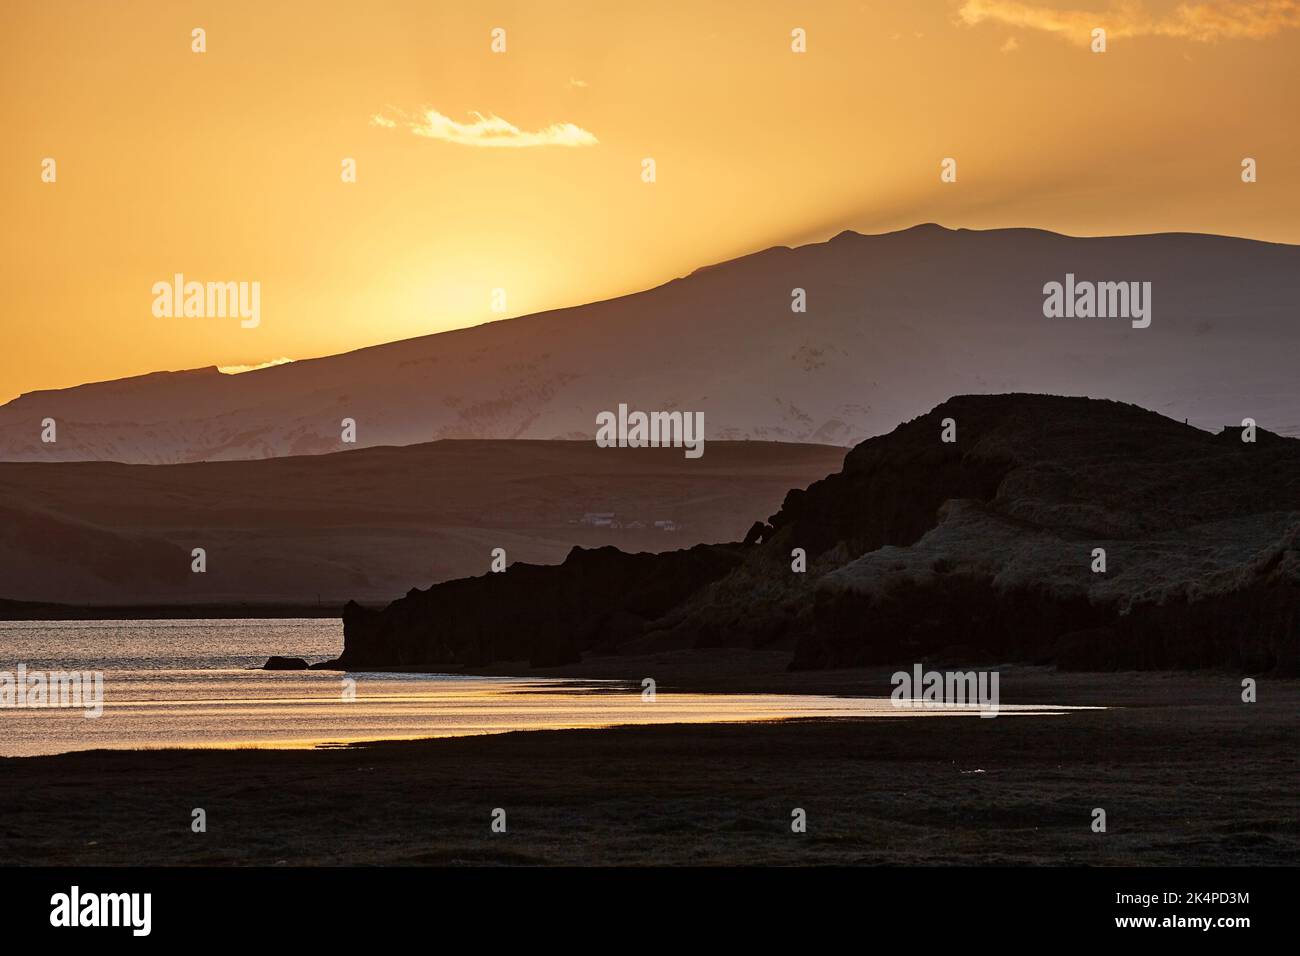 Sunset with Lake and Hilly Landscape Stock Photo